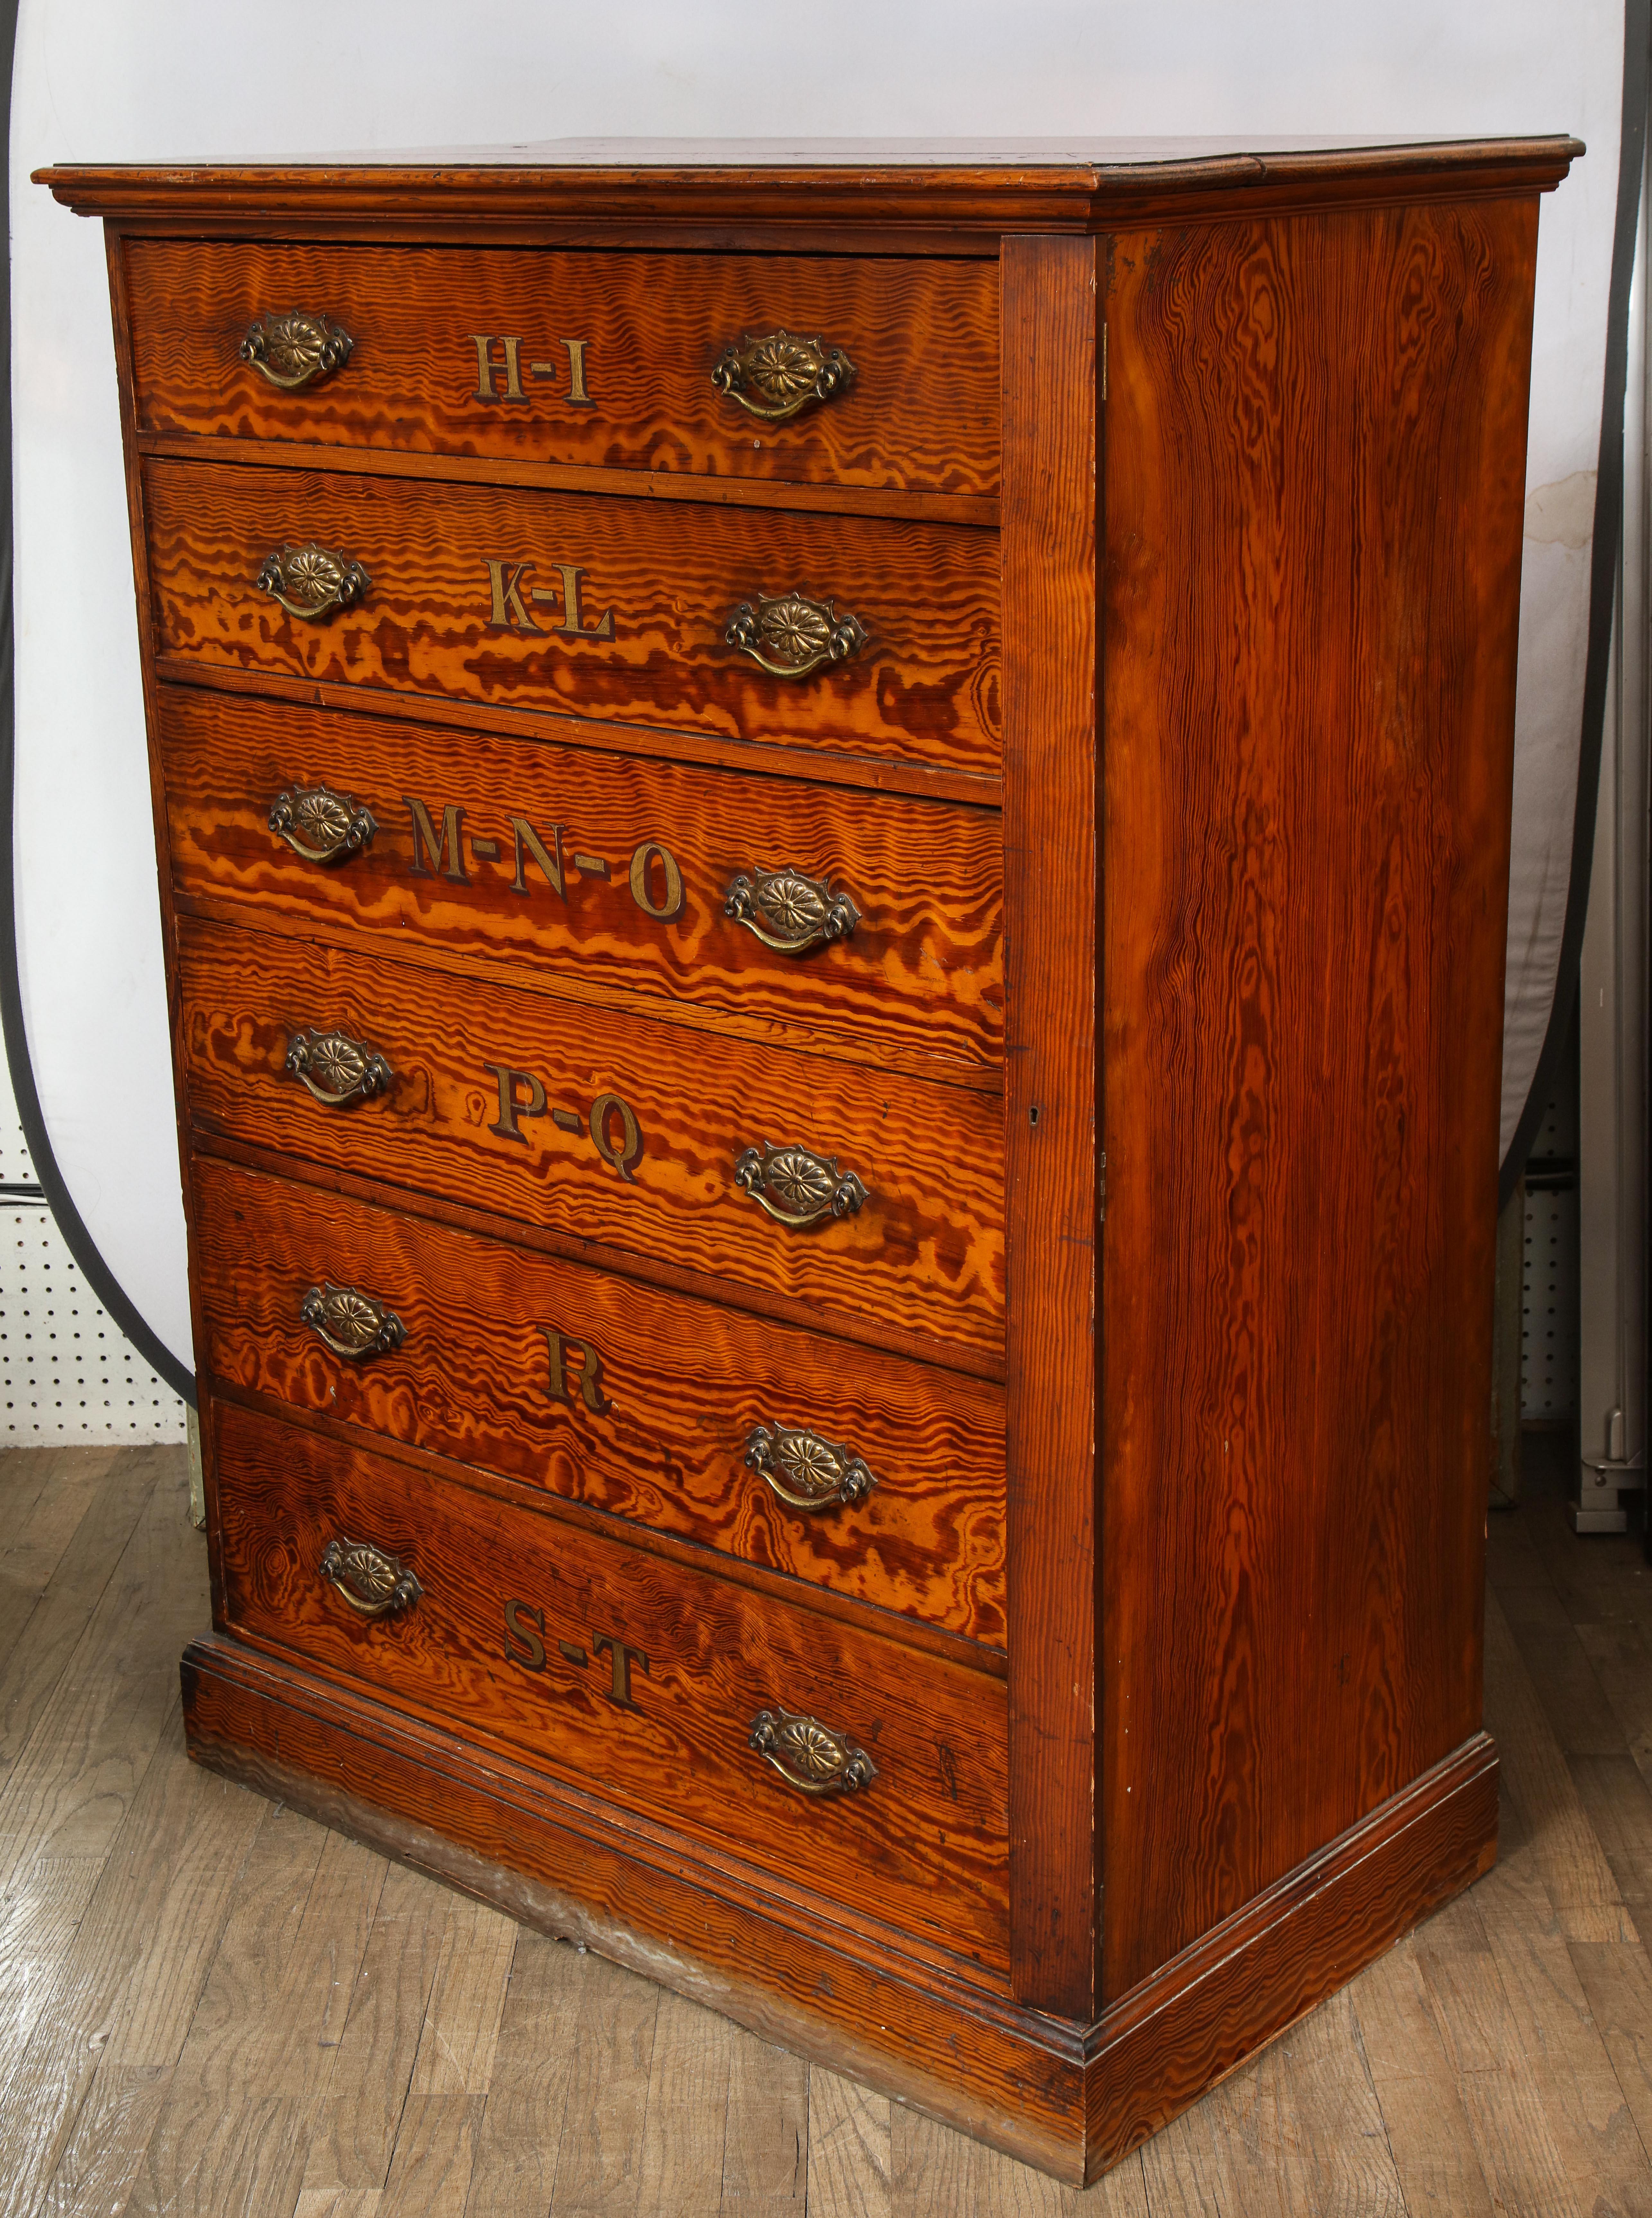 Hand-picked by buyers at Ann Morris Inc. 

From UK circa 1890s  